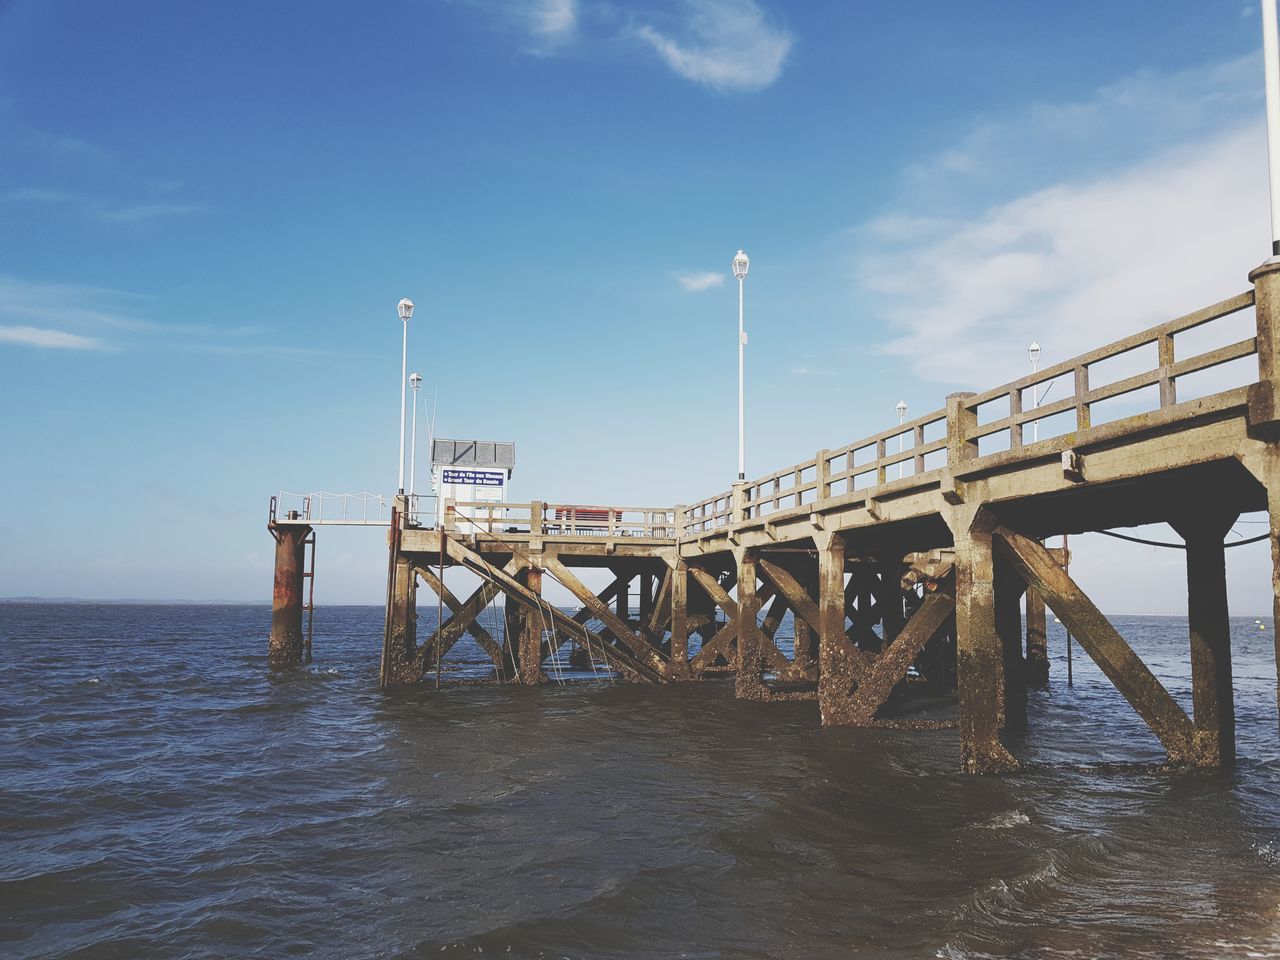 connection, bridge - man made structure, engineering, water, cloud - sky, sea, sky, built structure, no people, day, architecture, outdoors, nature, scenics